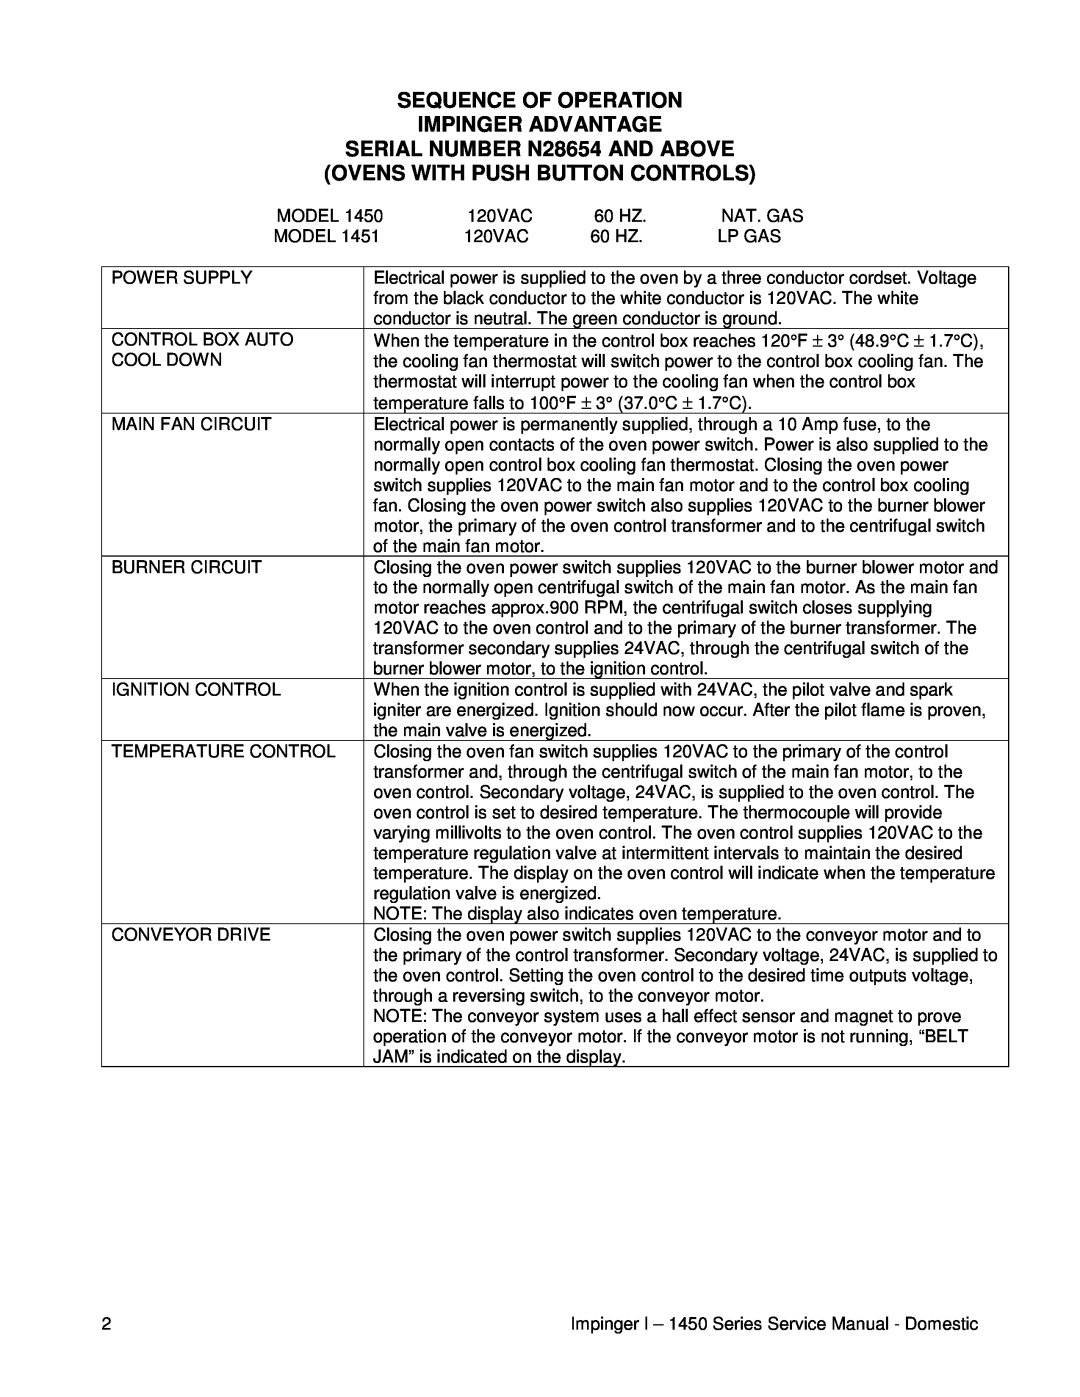 Cub Cadet 1450, 1451 service manual Sequence Of Operation Impinger Advantage 